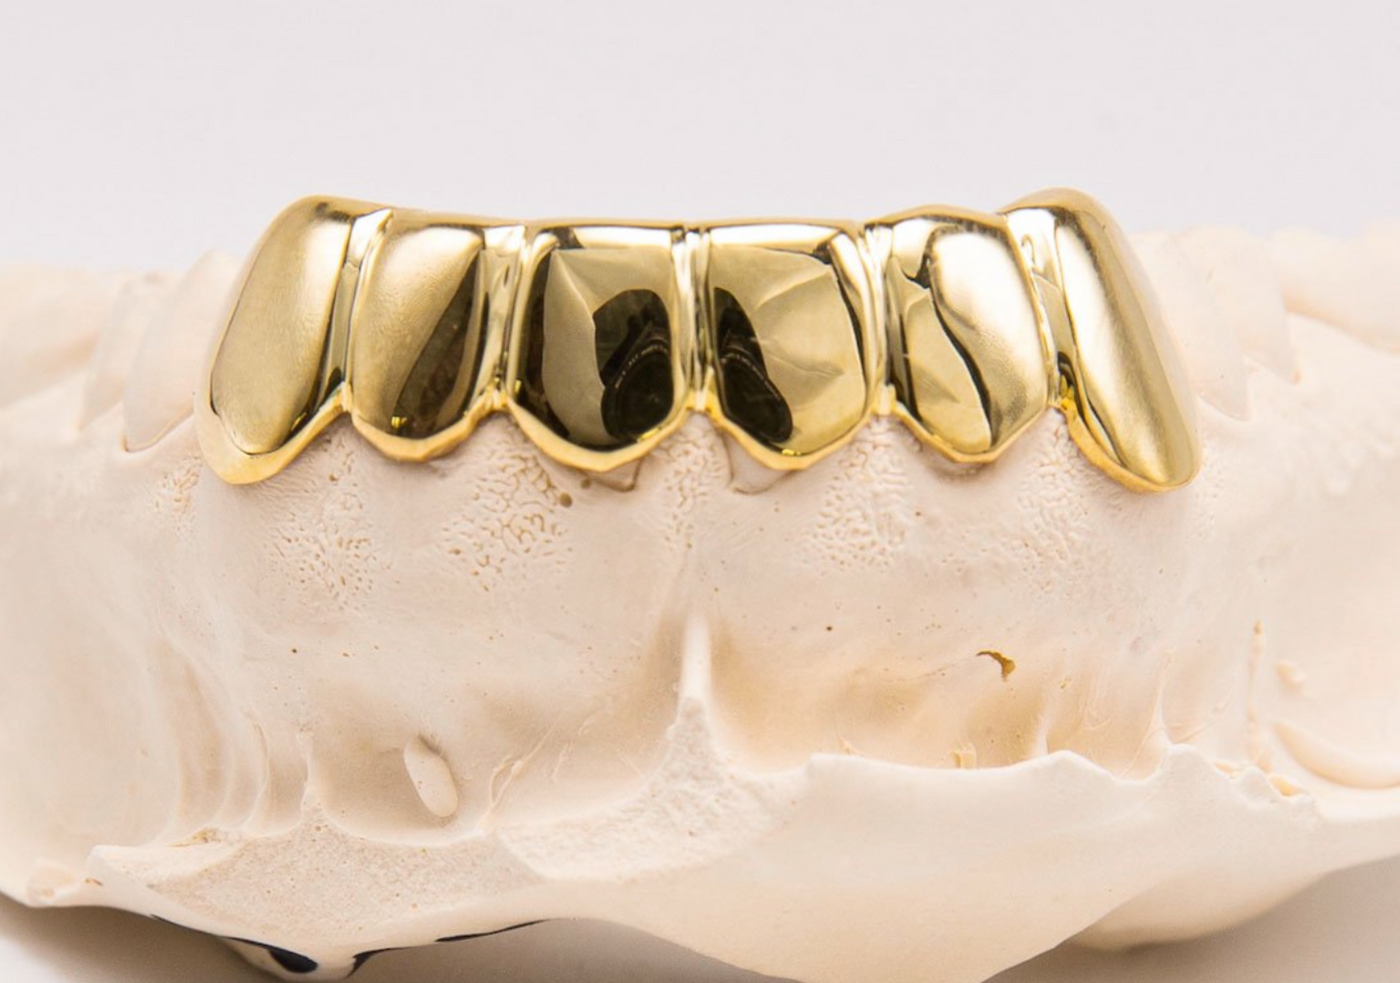 Do It Your Self Mold Kit - Gold Grillz Miami Official Website (305) 989-6479